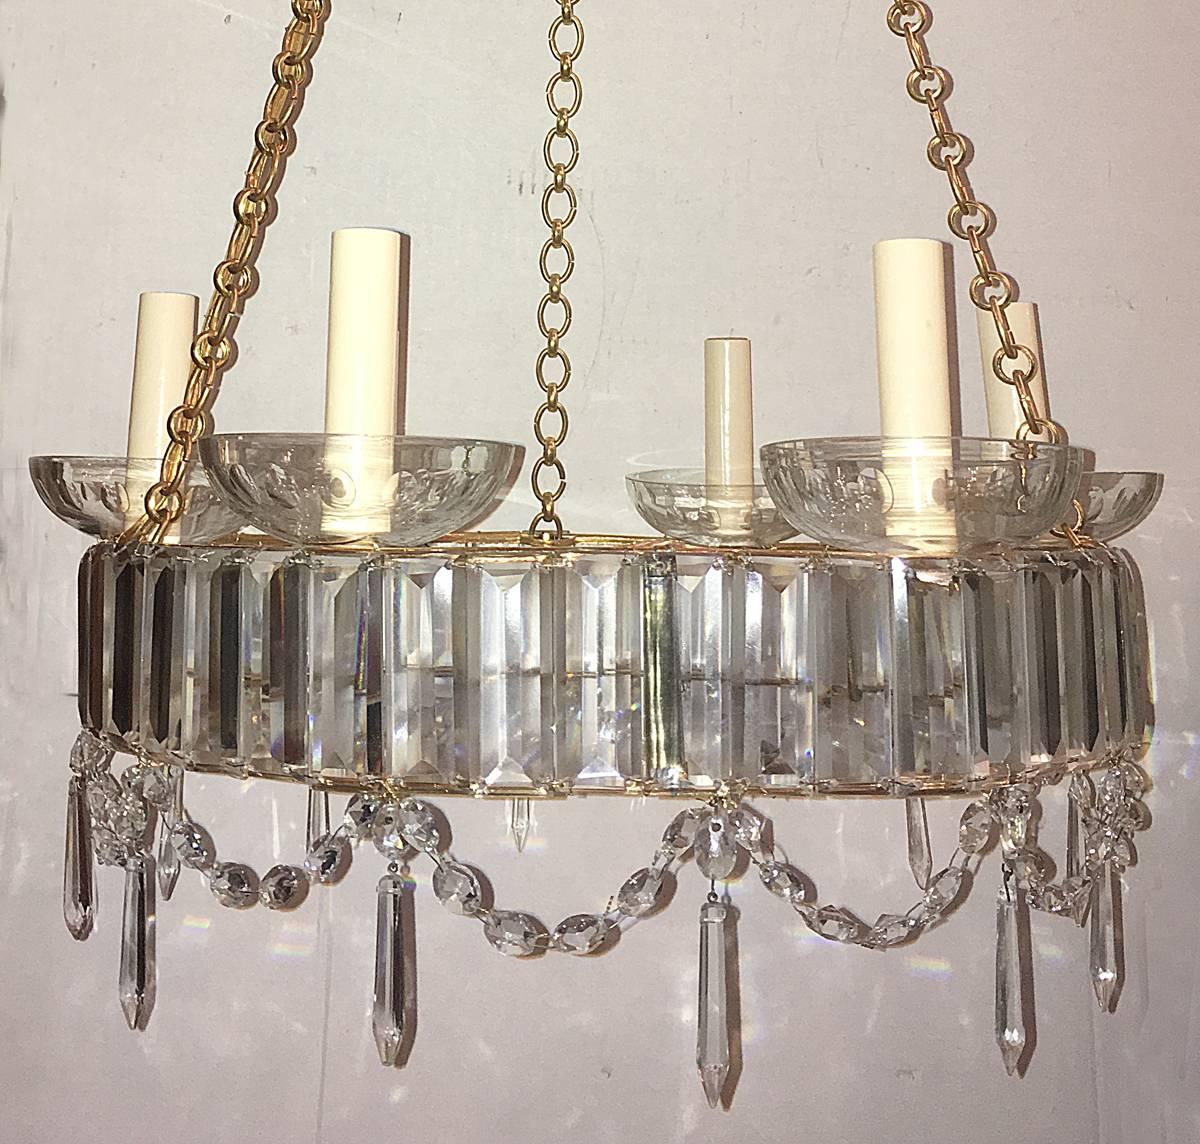 A circa 1930's Swedish six-light neoclassic chandelier with crystal insets, etched bobeches, bronze chain and canopy.

Measurements:
Height: 24